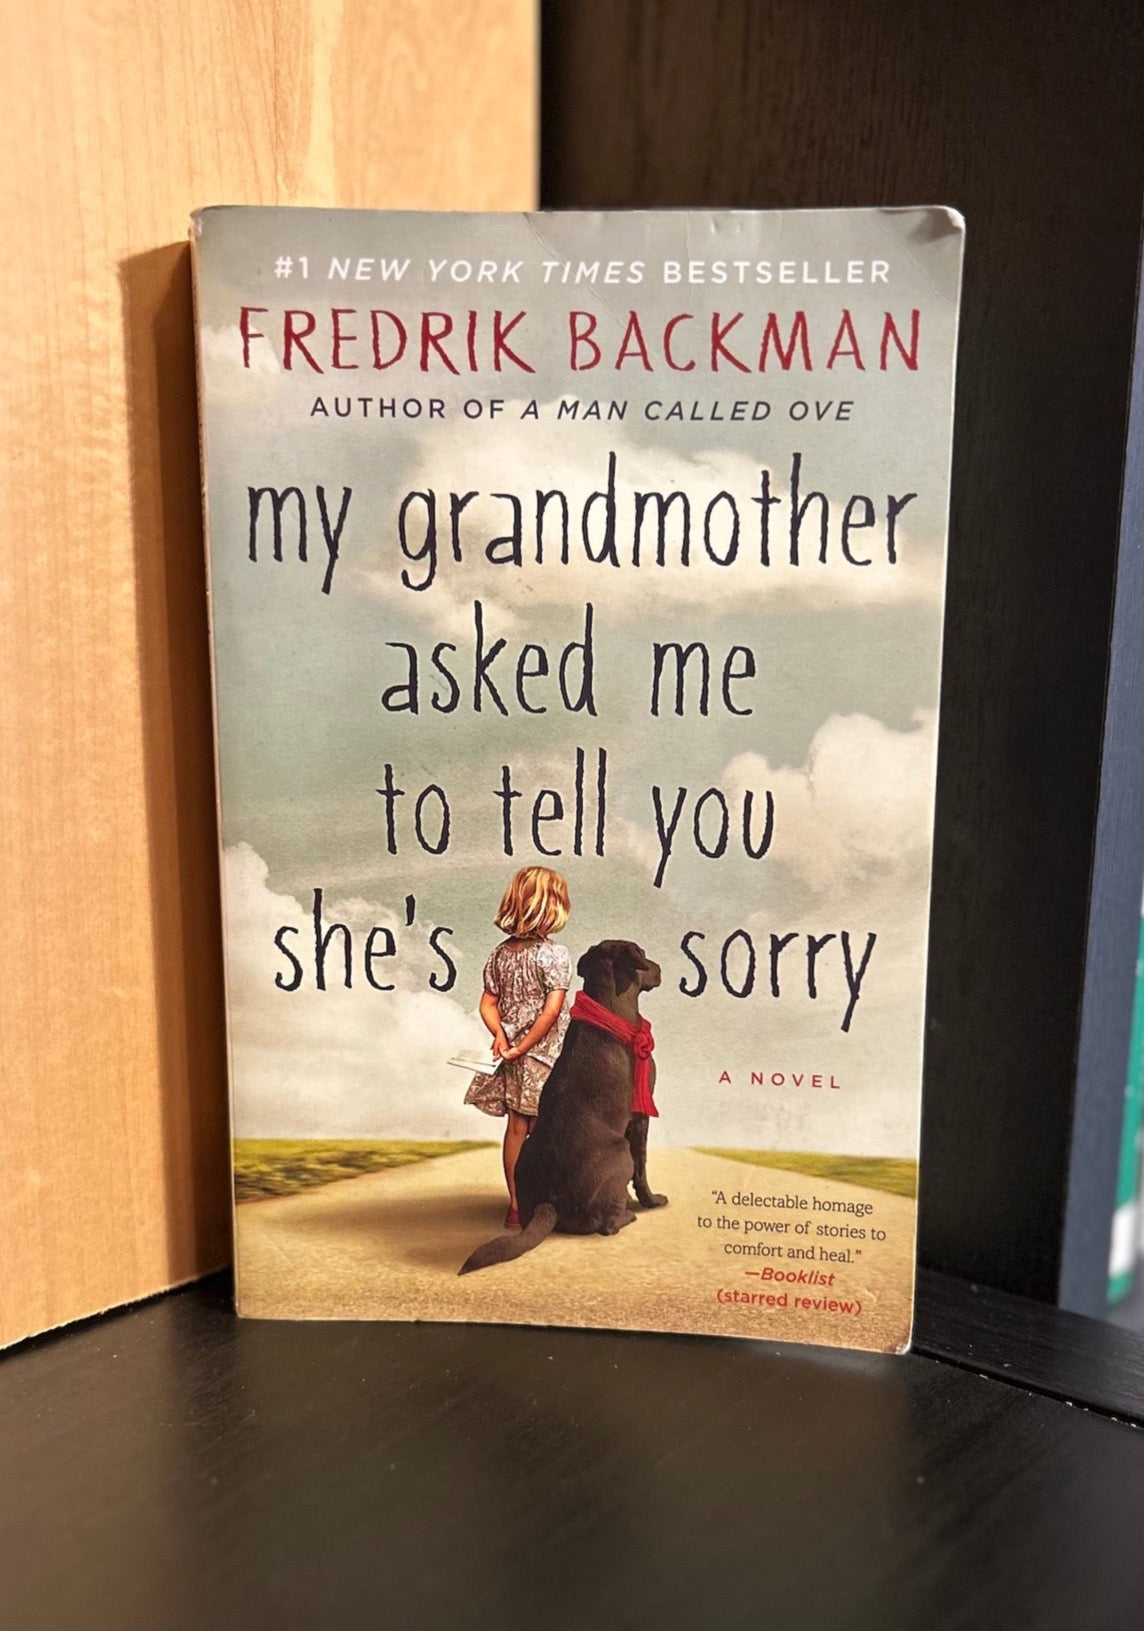 My Grandmother Asked Me to Tell You She's Sorry - Fredrik Backman